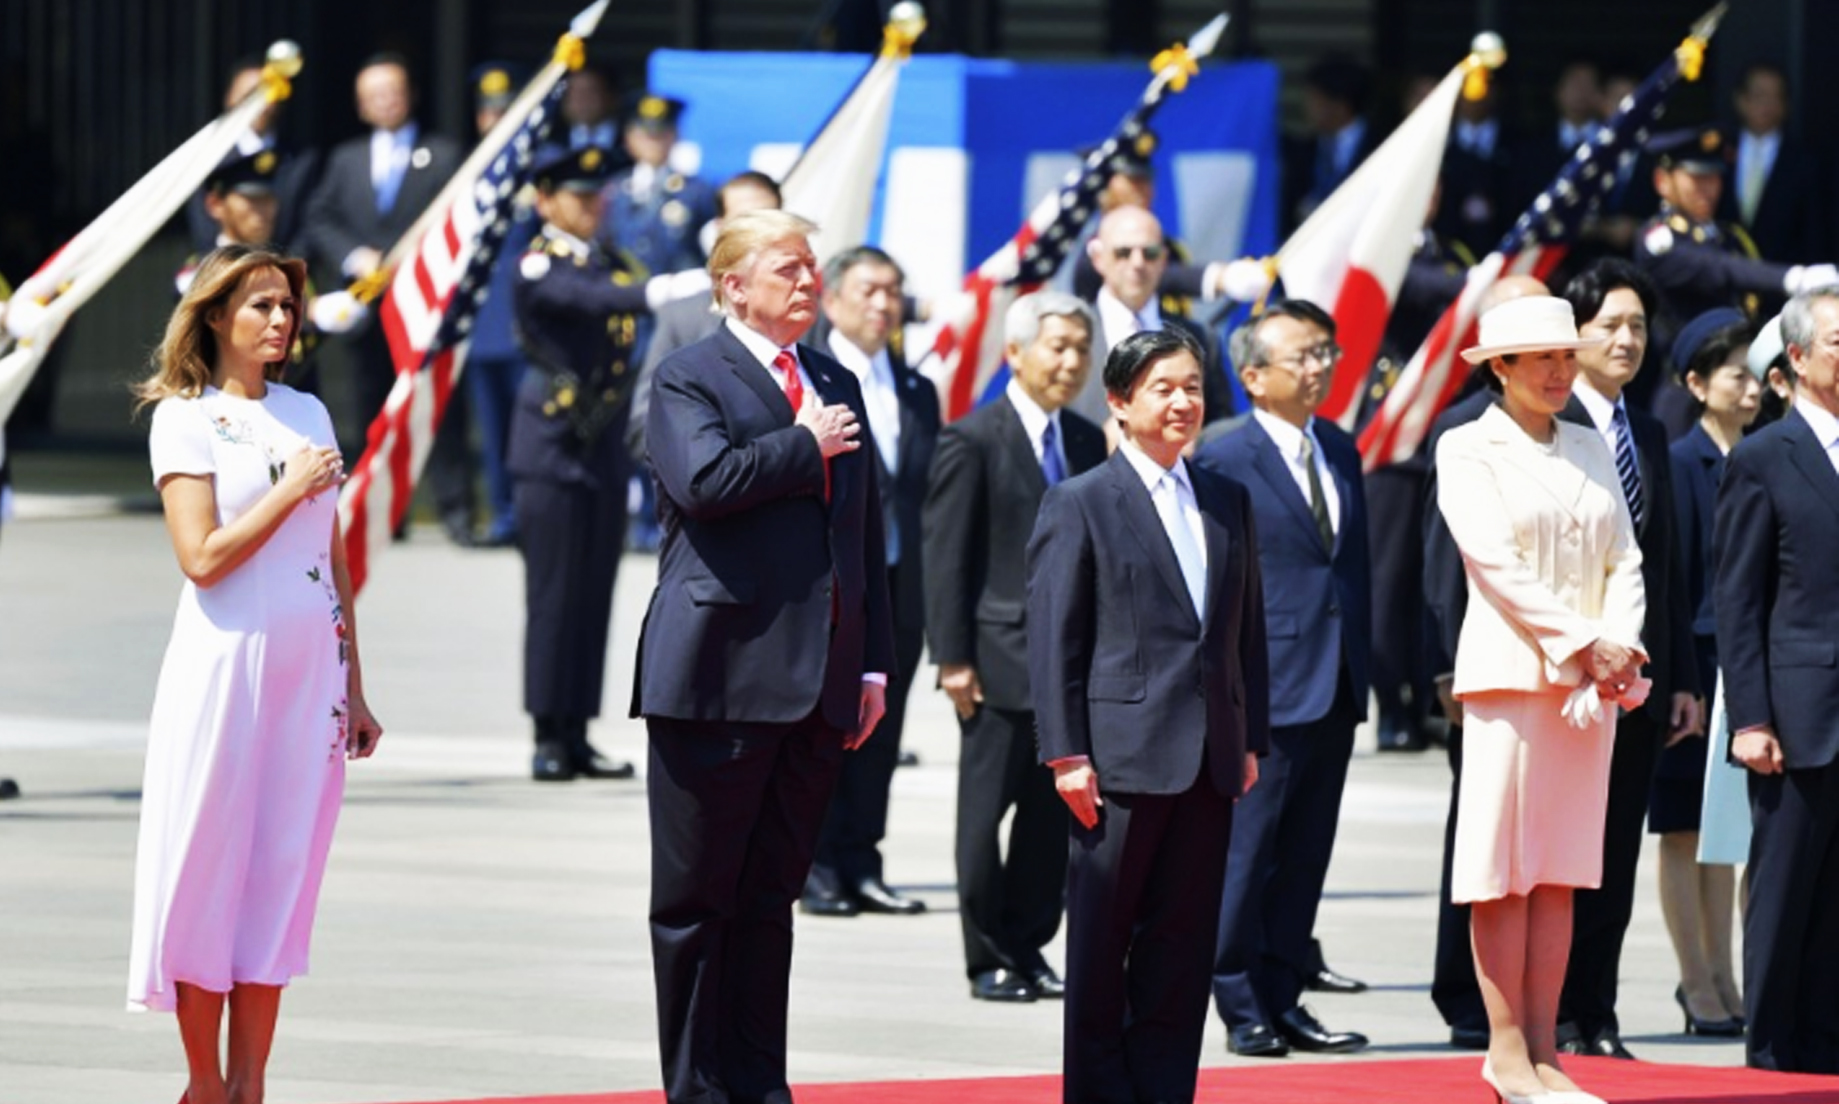 Japan’s Emperor Naruhito meets Trump, 1st state guest since taking throne